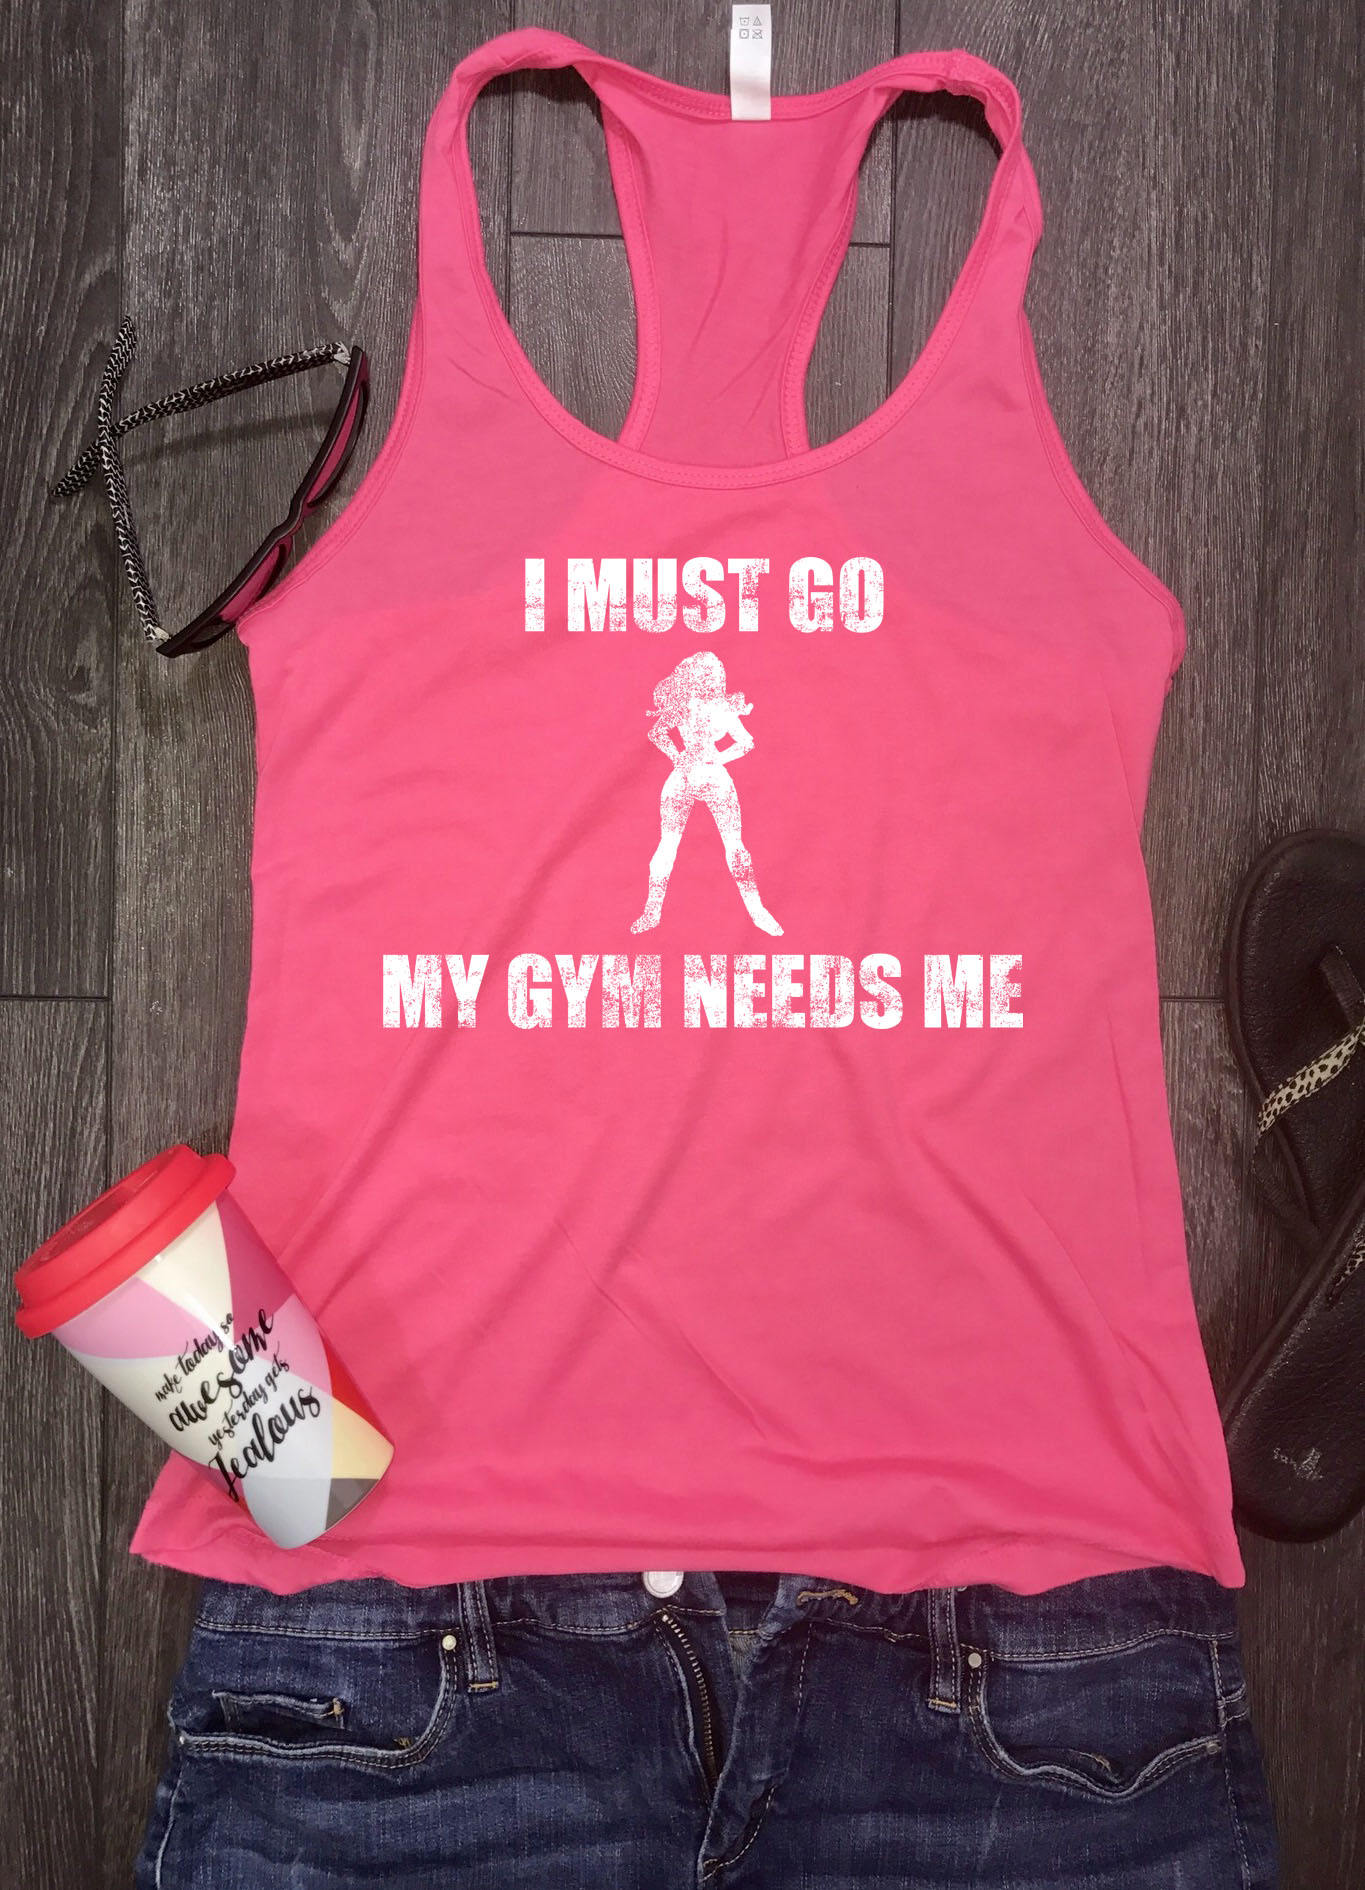 I must go my gym needs me workout tank, funny workout tank